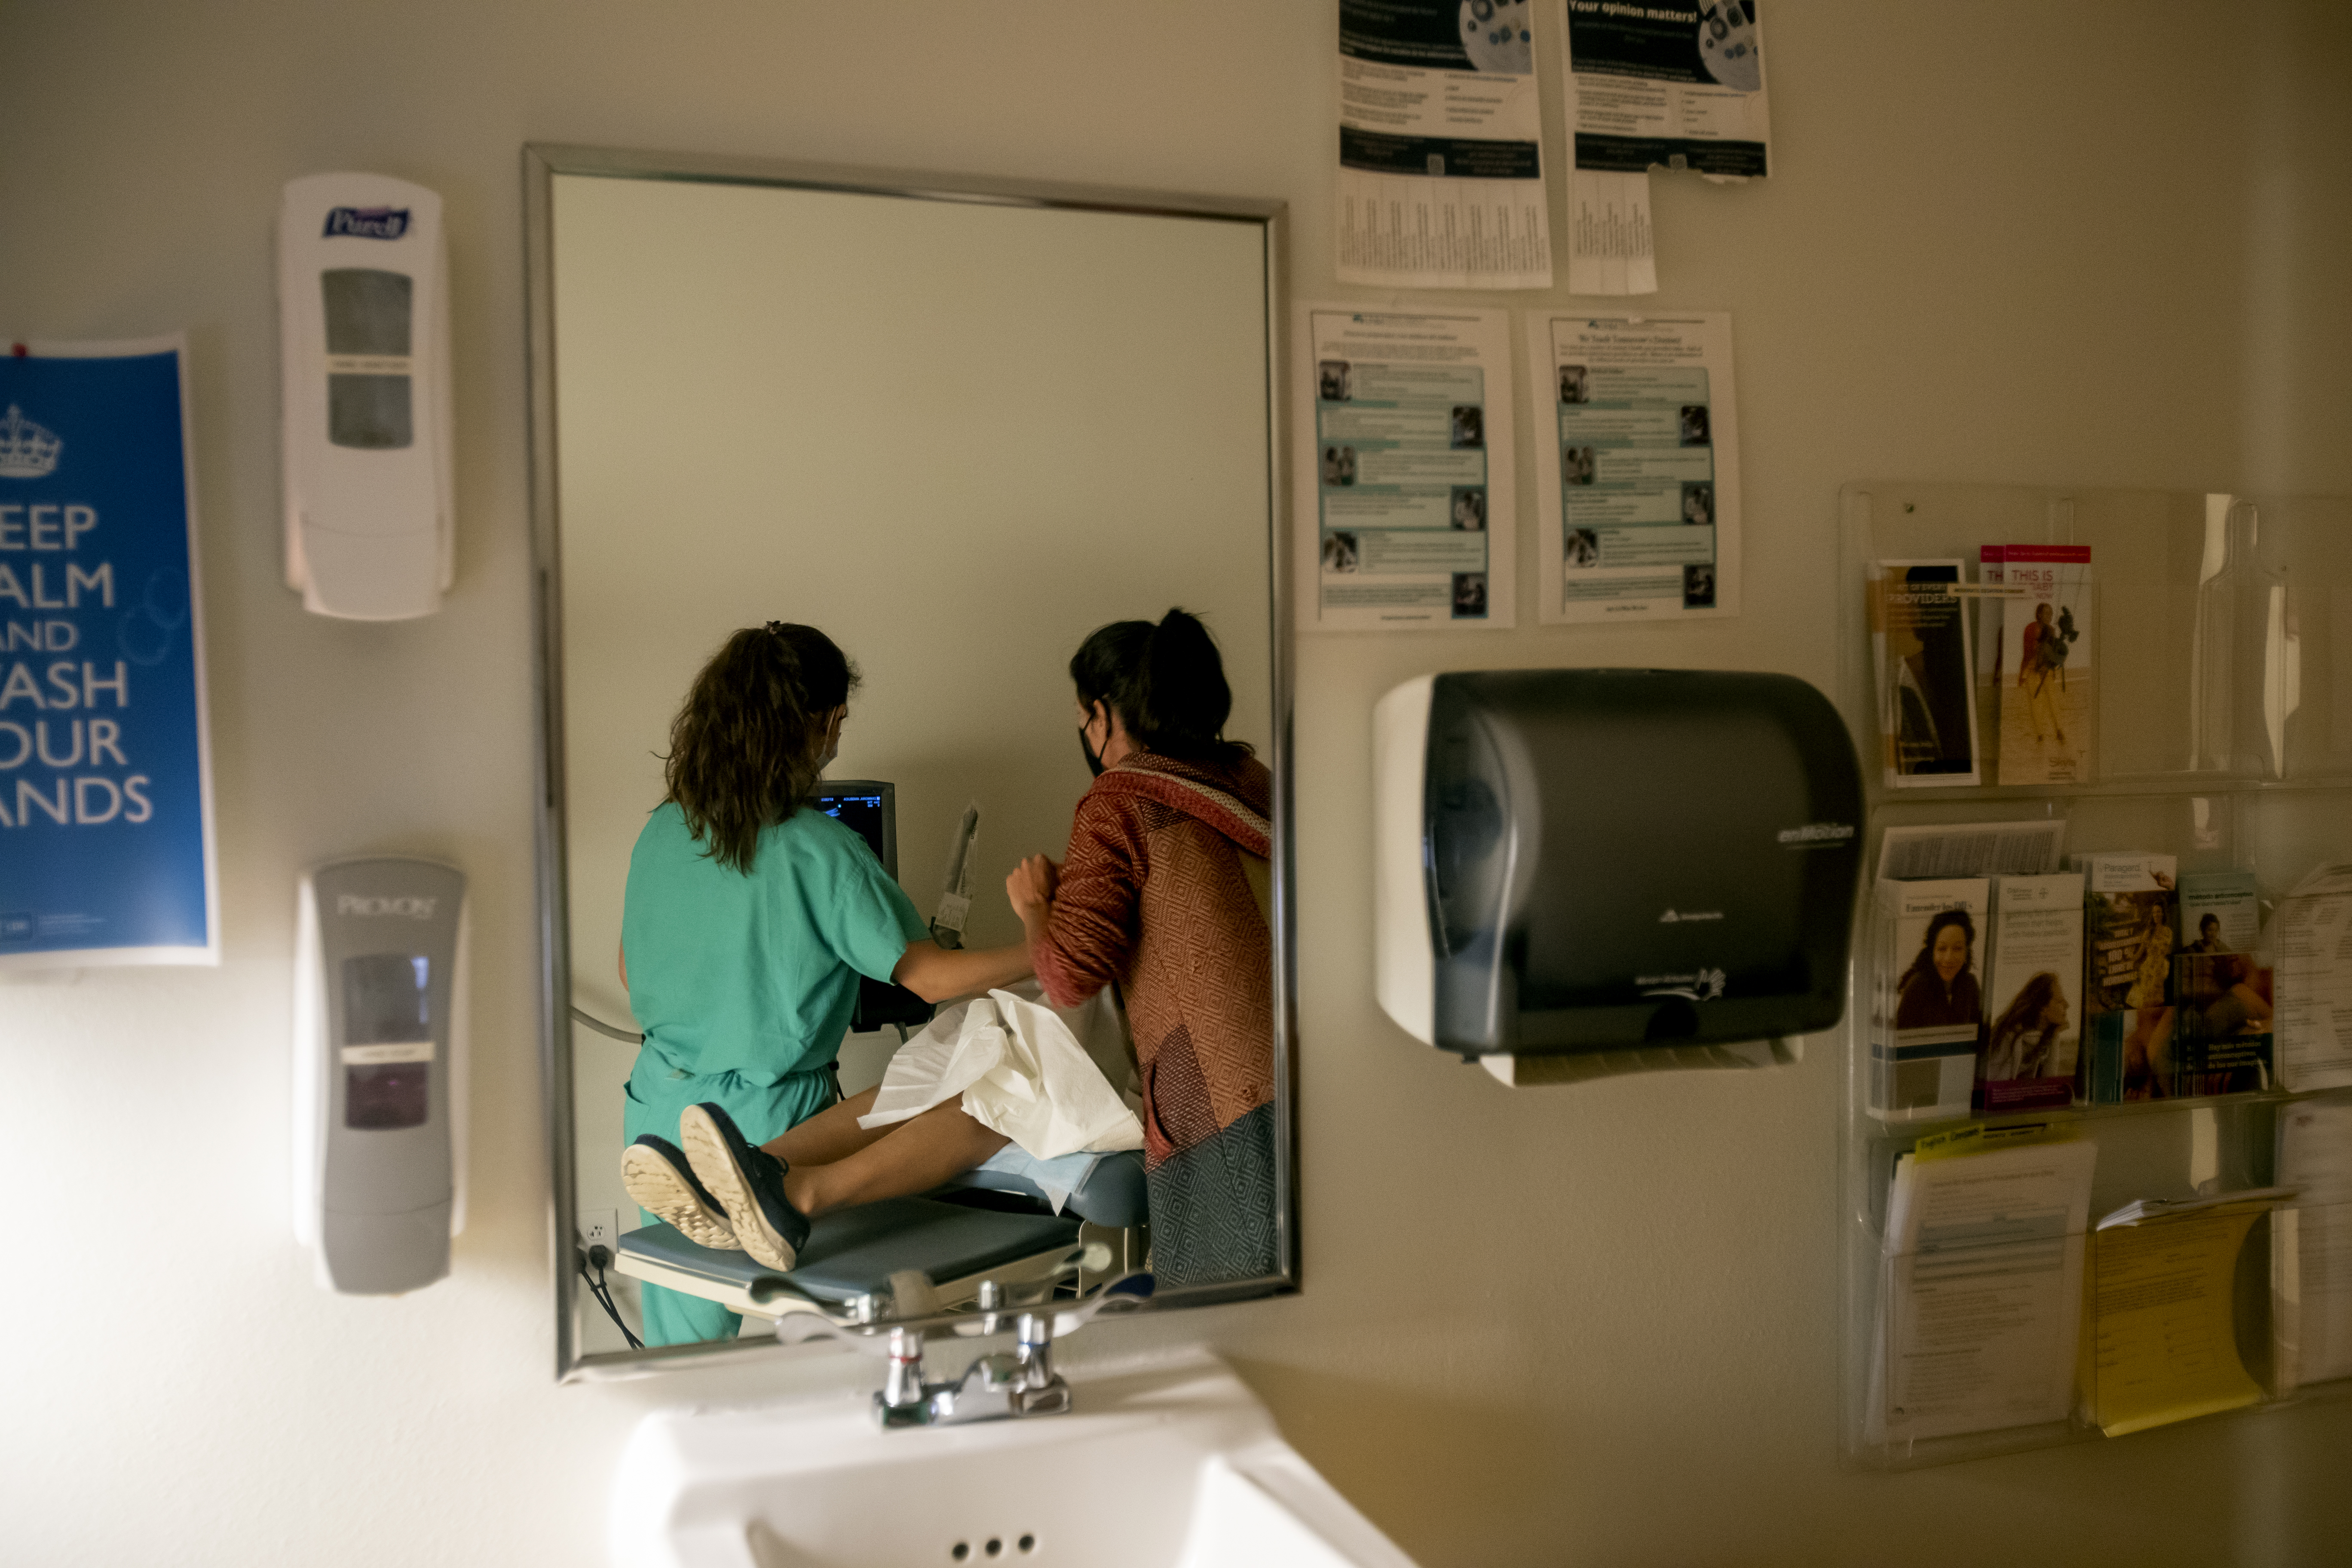 The reflection in the mirror above the sink in an examination room shows two women performing an ultrasound on a third.